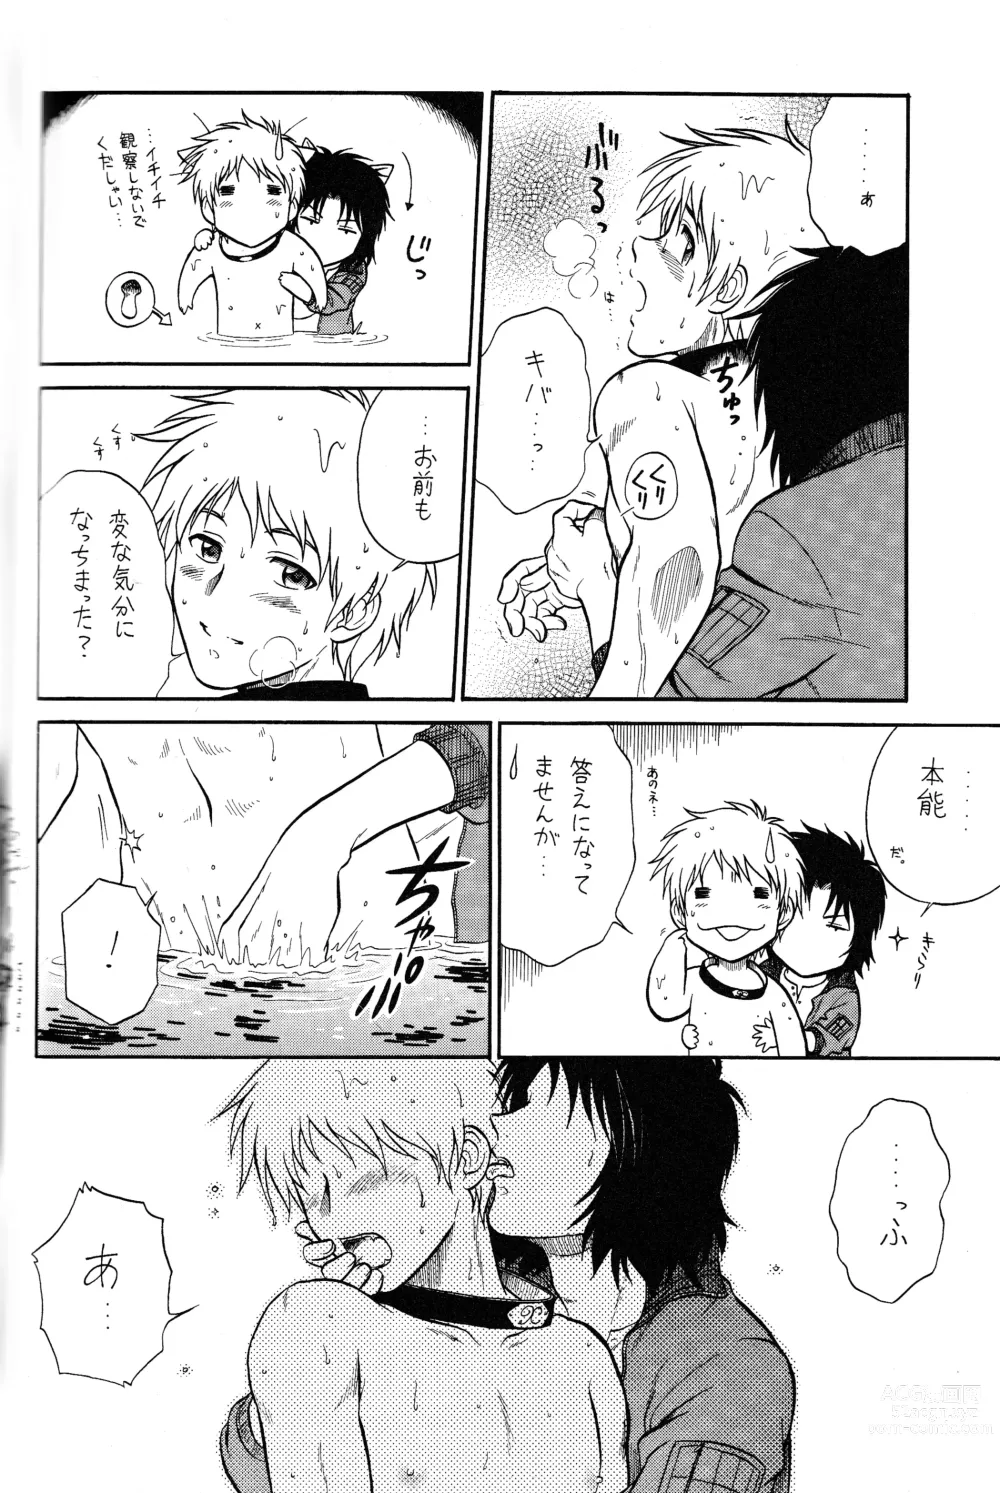 Page 12 of doujinshi K to H